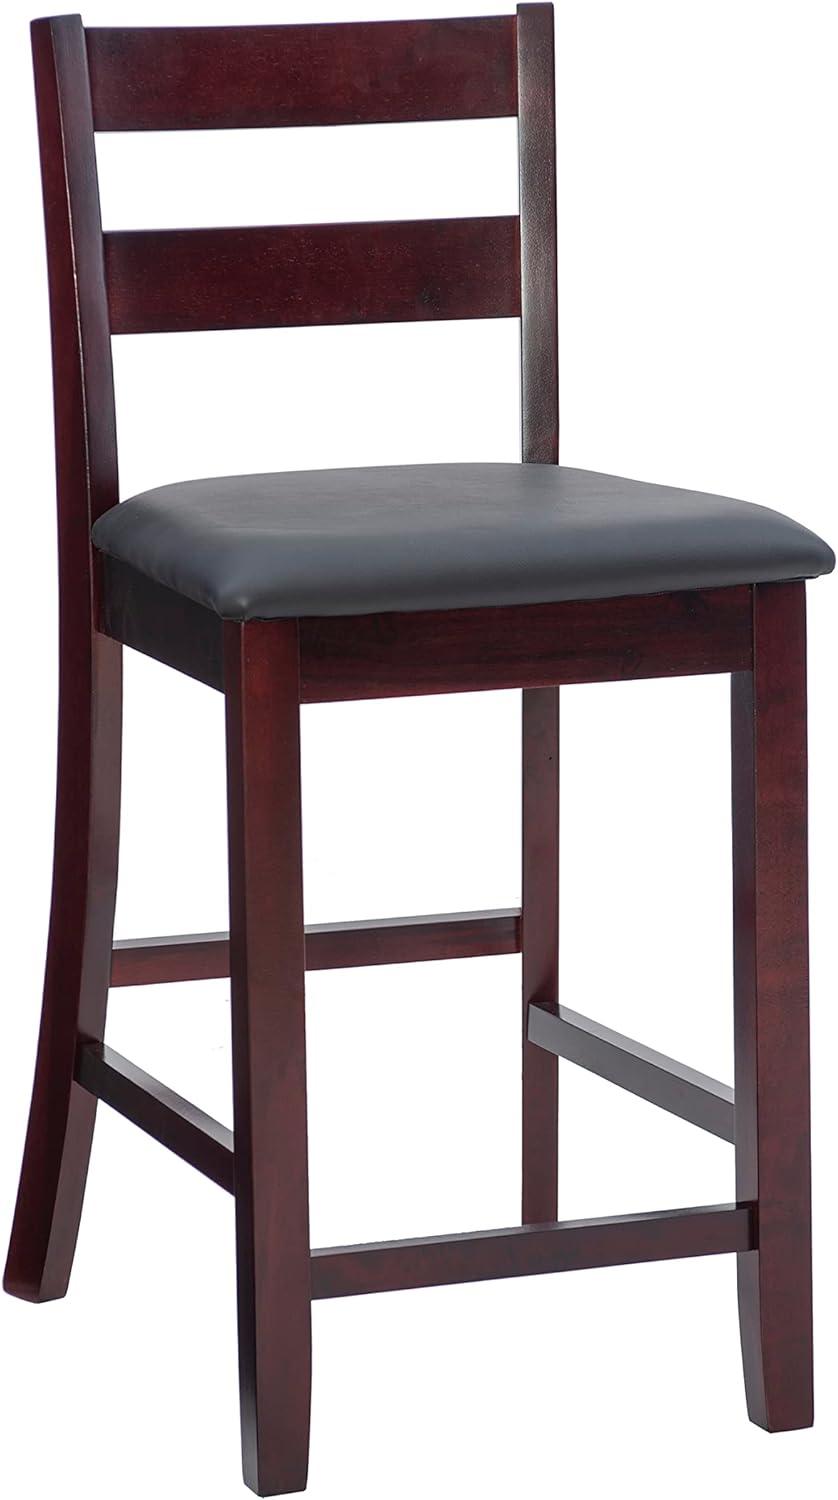 Triena Soho 24" Dark Cherry Wood and Brown Faux Leather Counter Stool